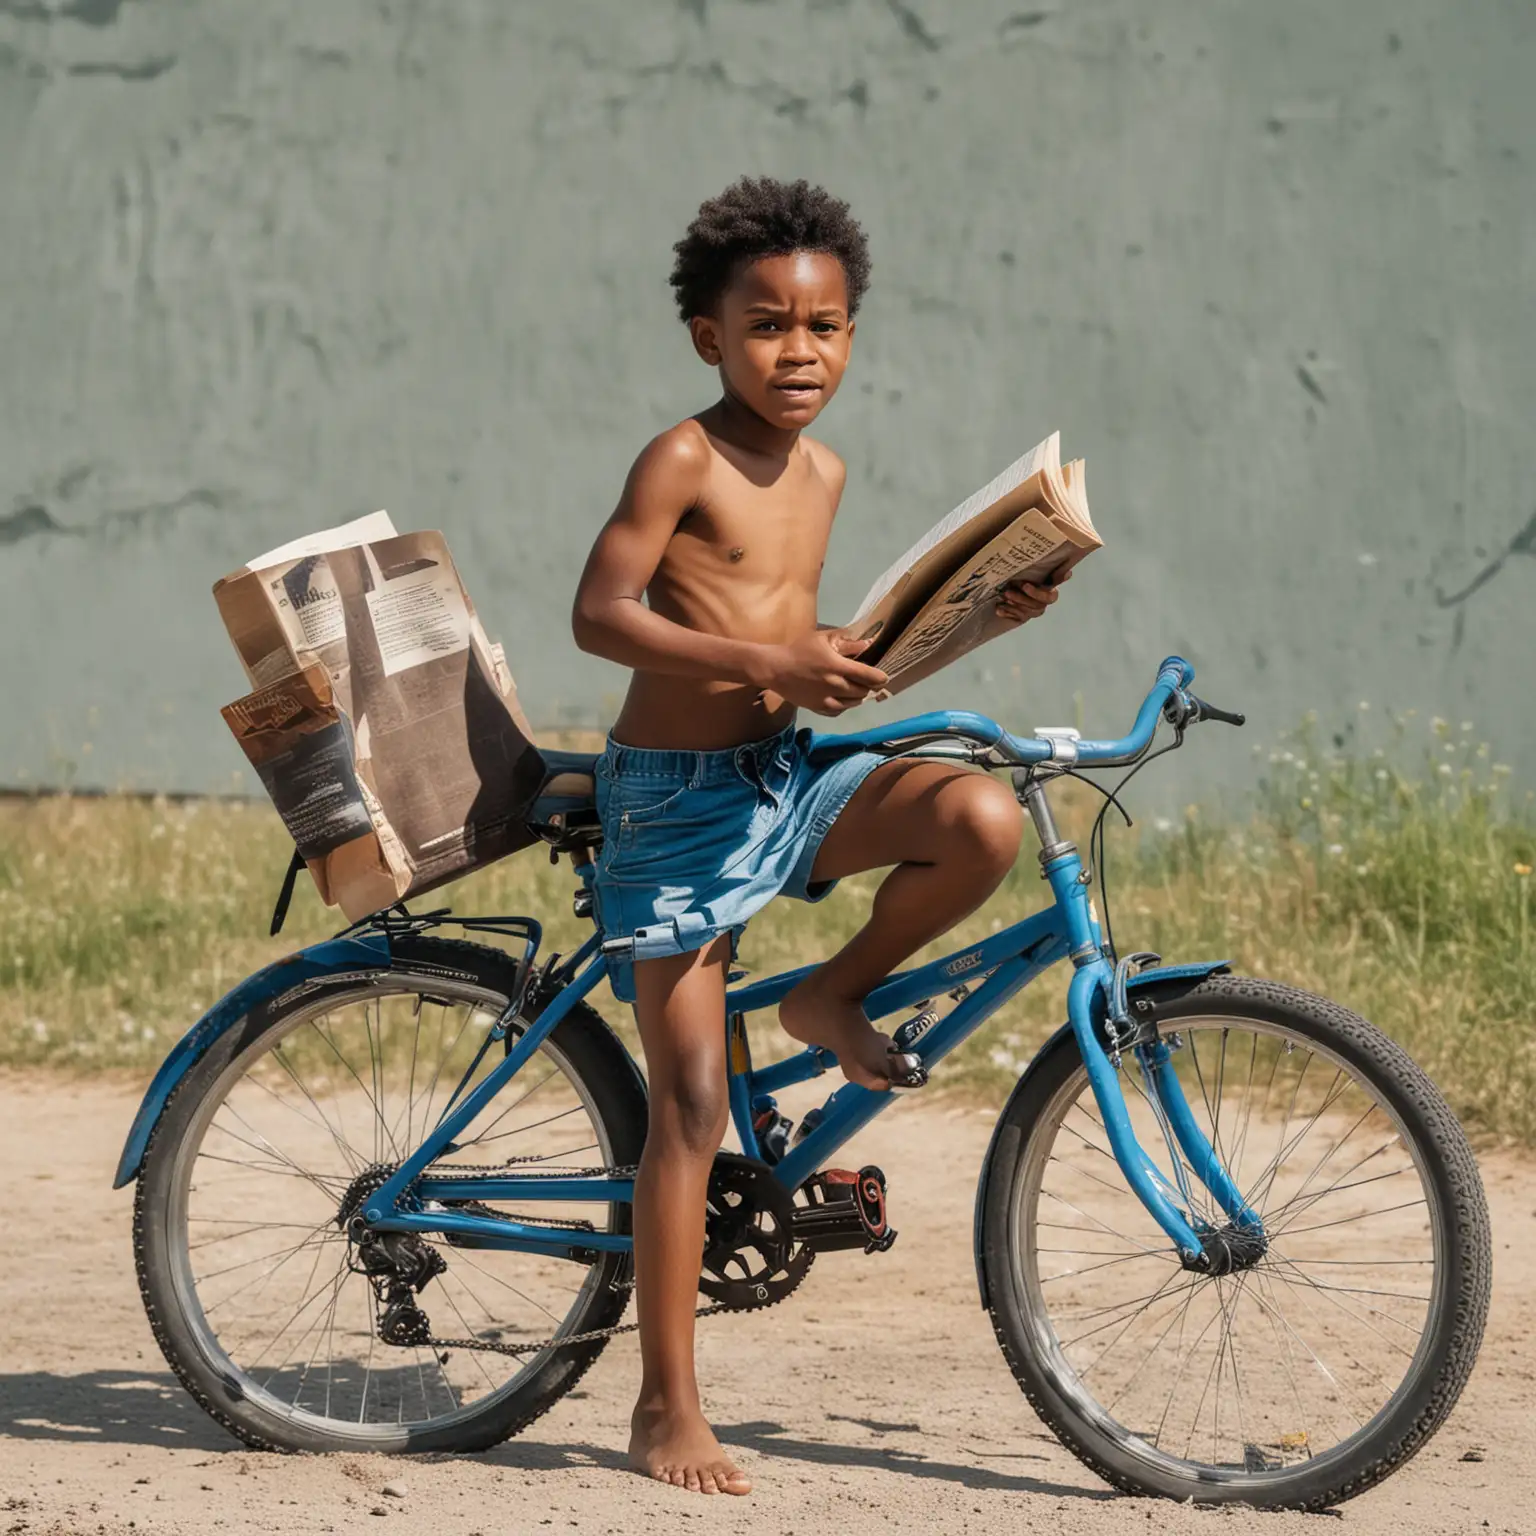 angry shirtless black boy barefoot with blue short holding book riding bicycling